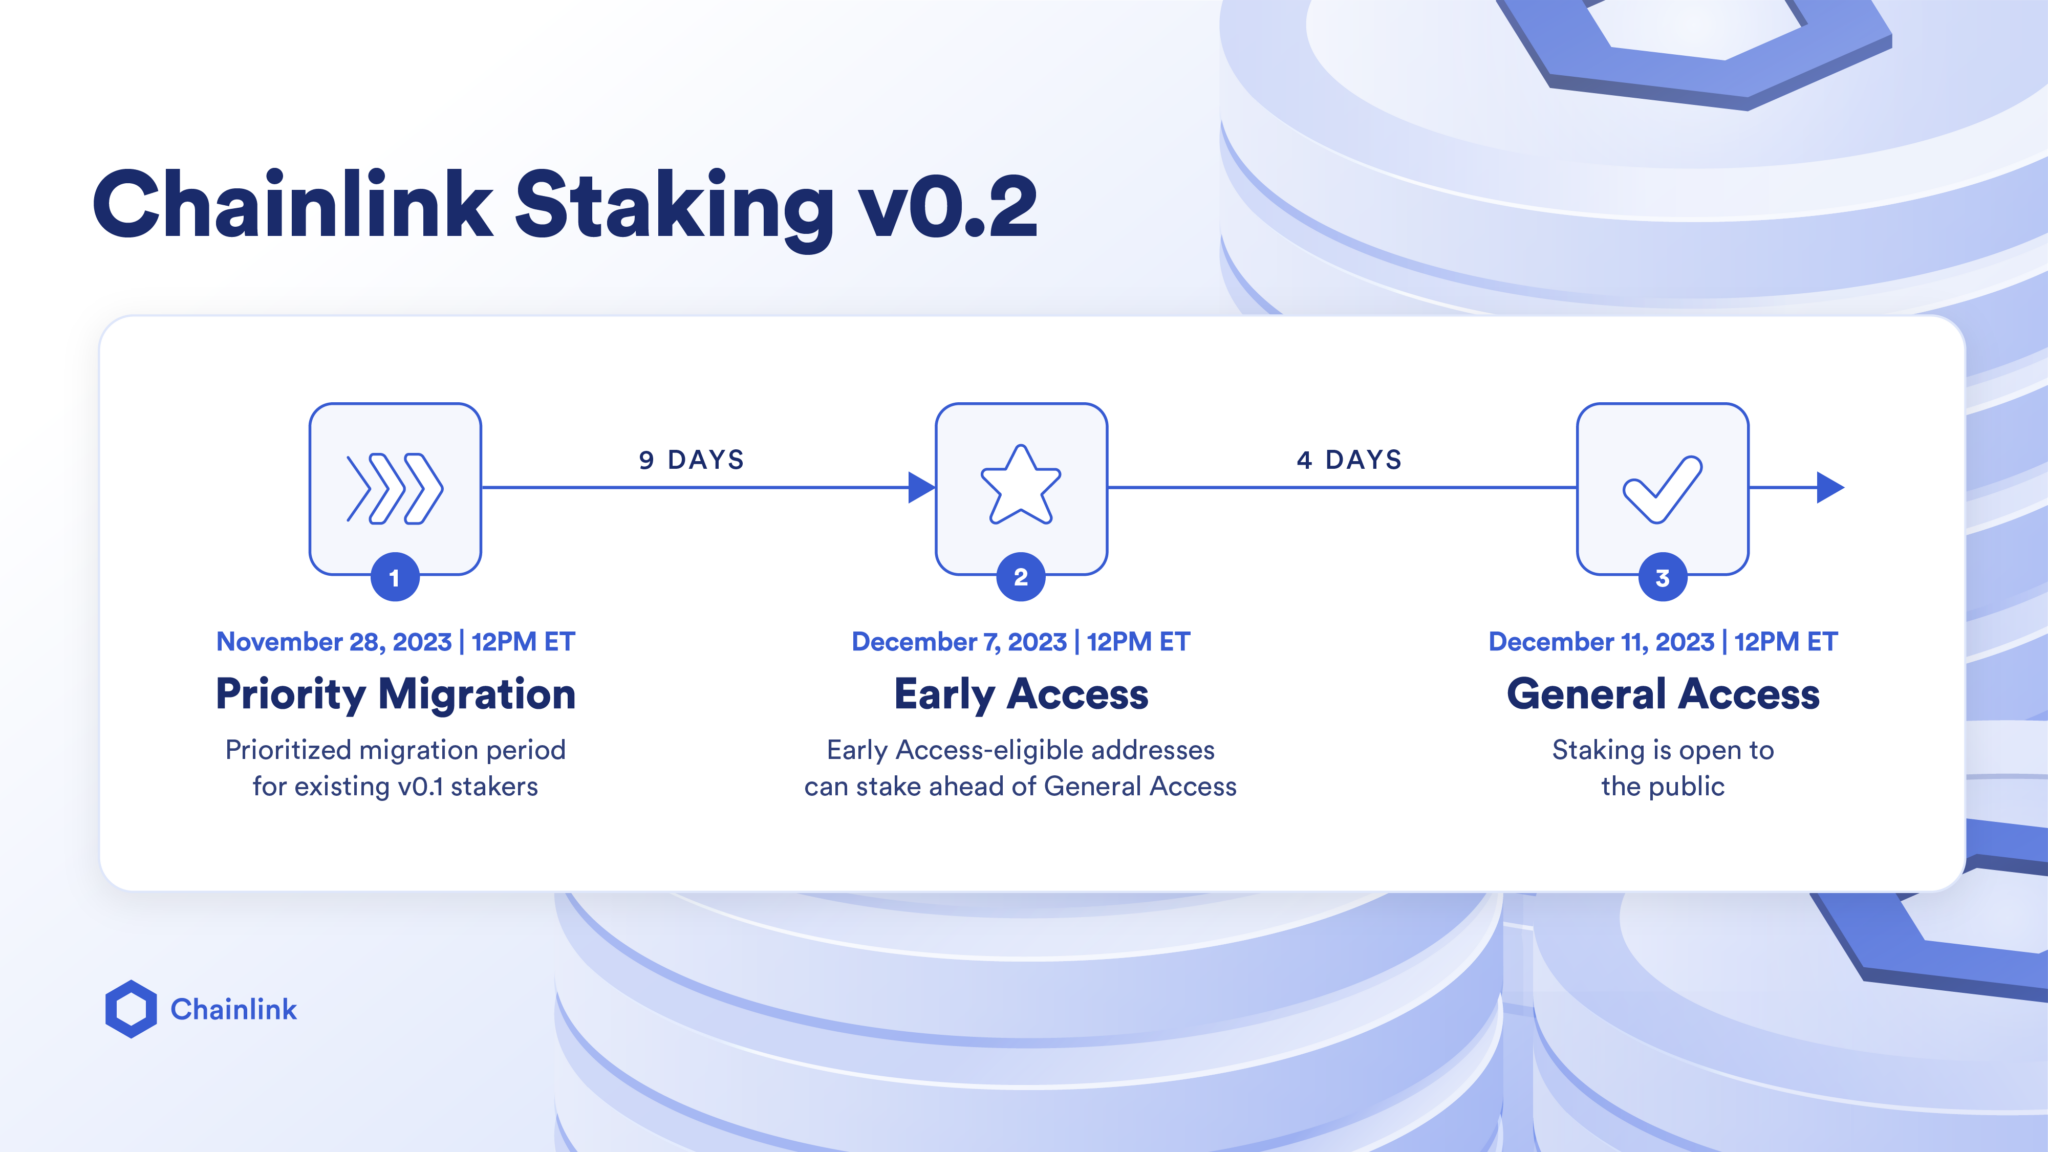 How Does the v Upgrade Improves Chainlink Staking?